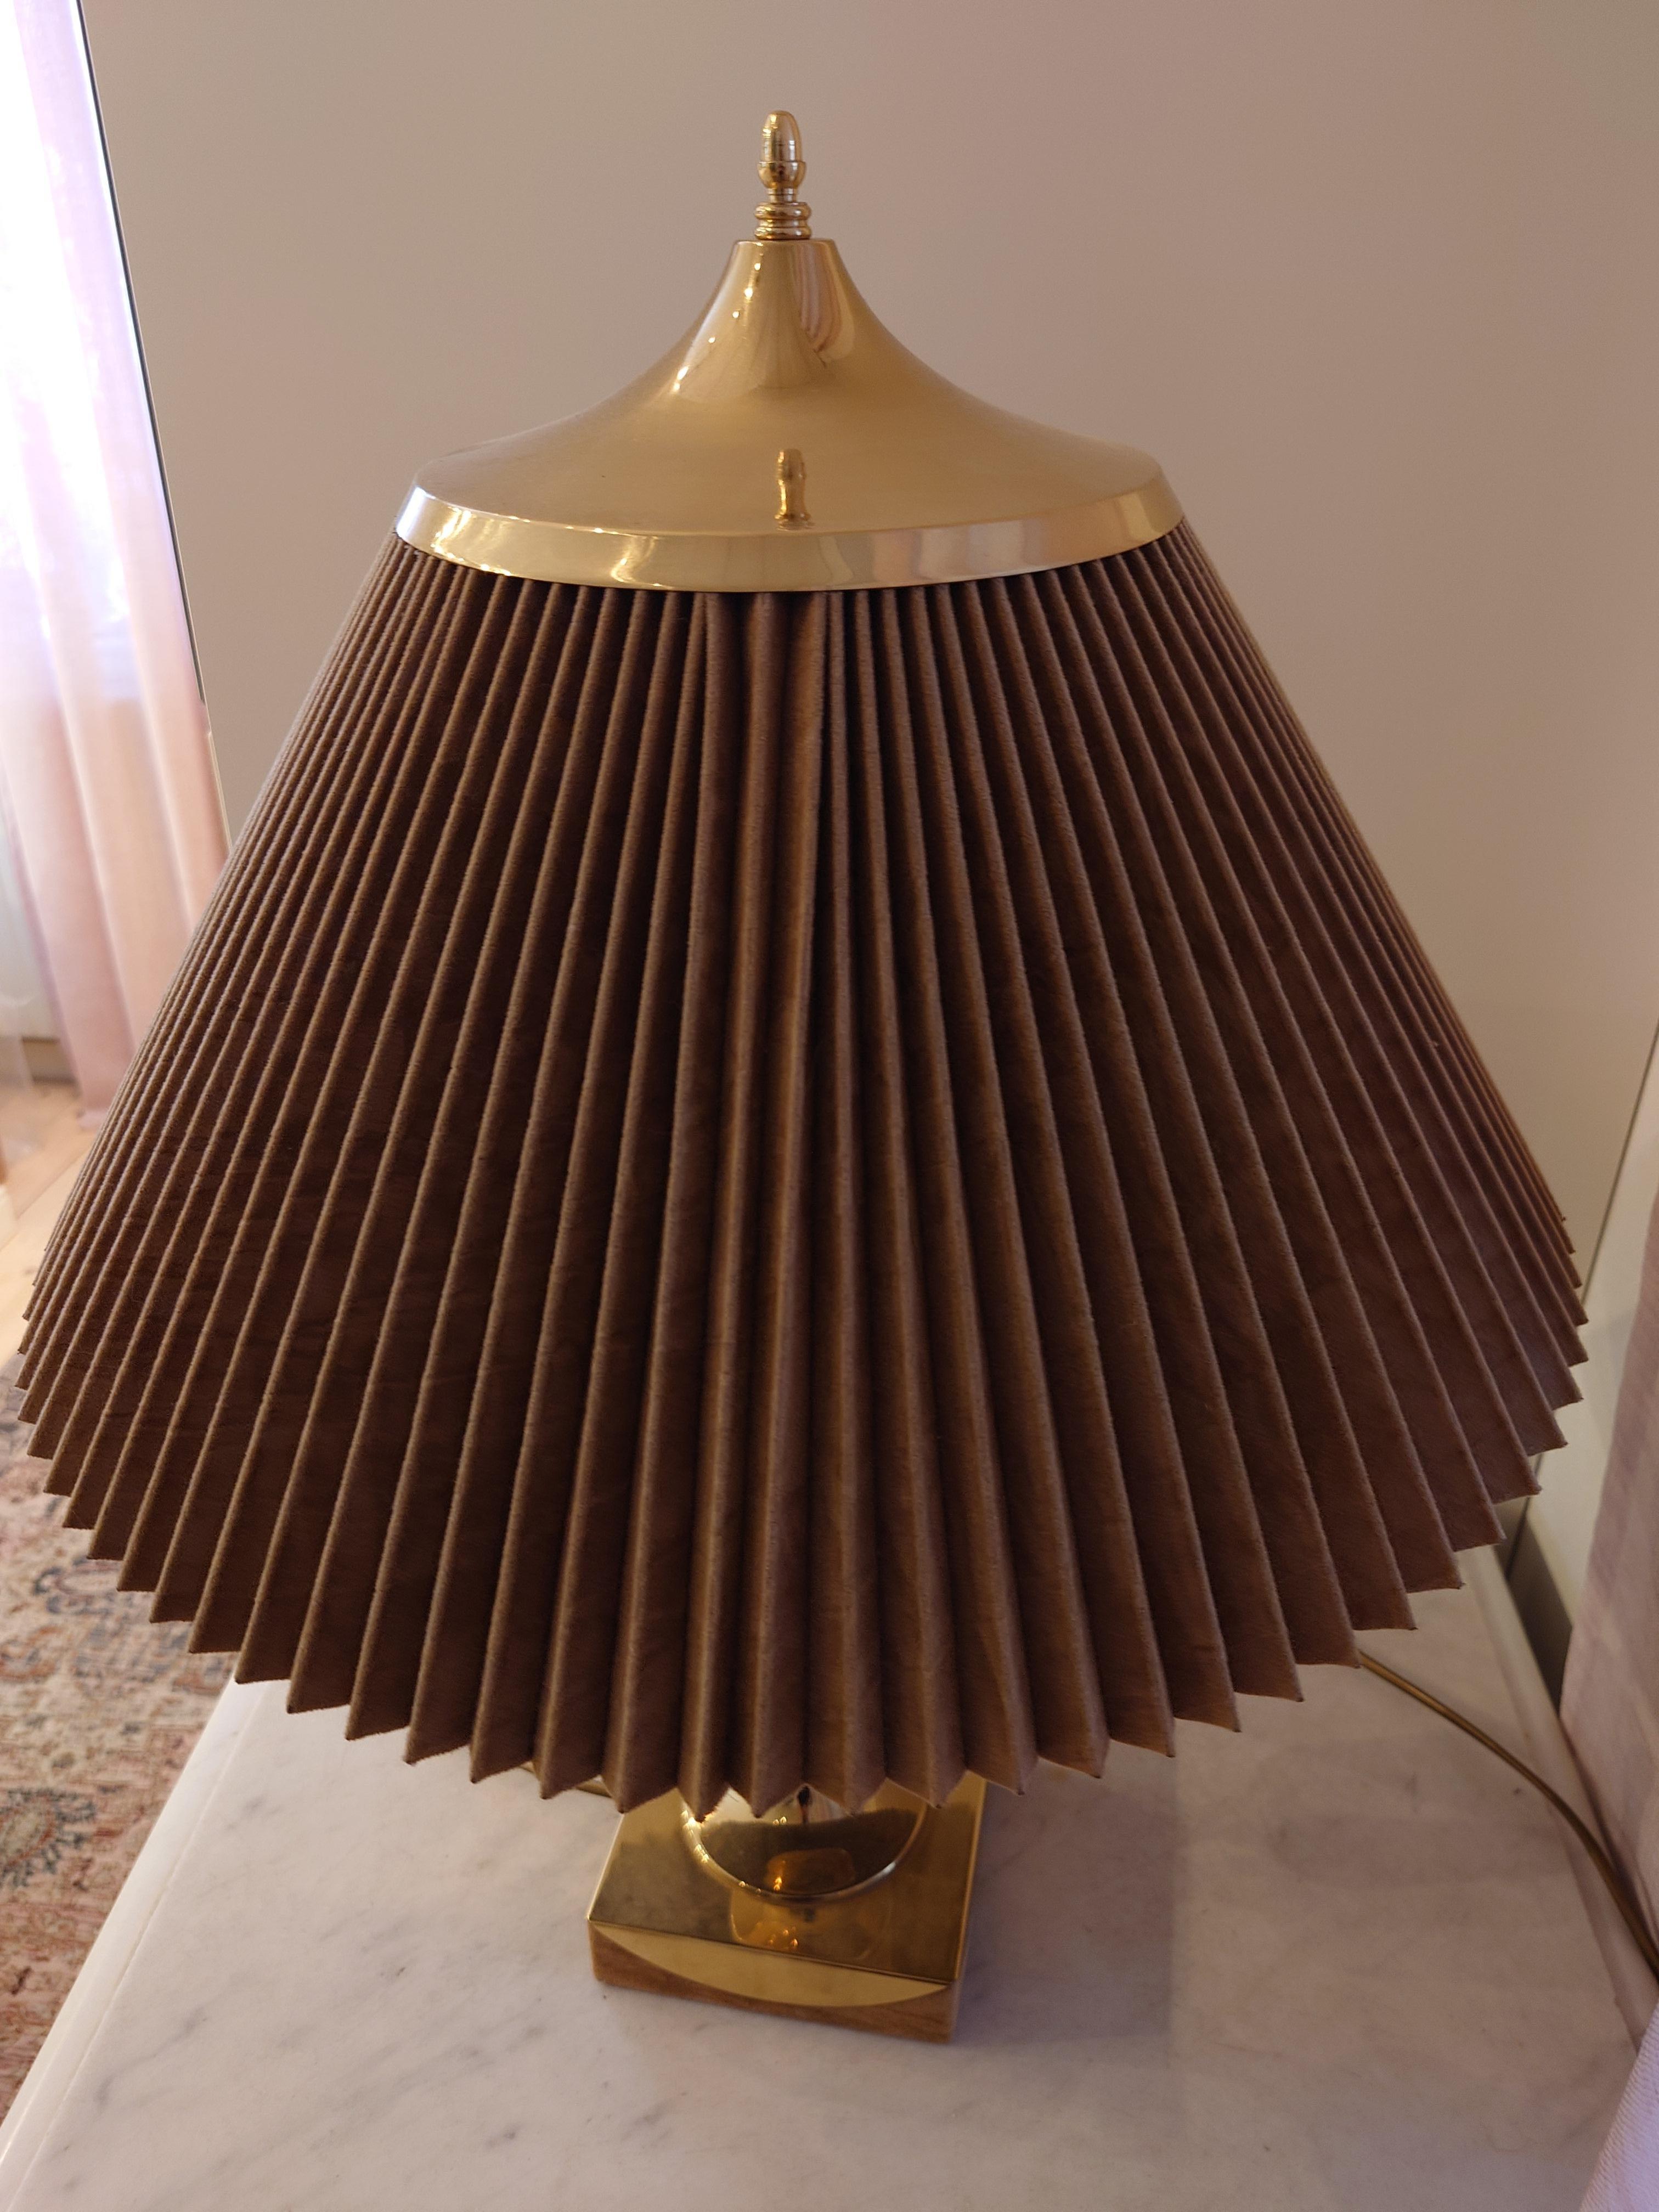  Tr & Co, Table Lamps, Brass, Norway, 1960s For Sale 6